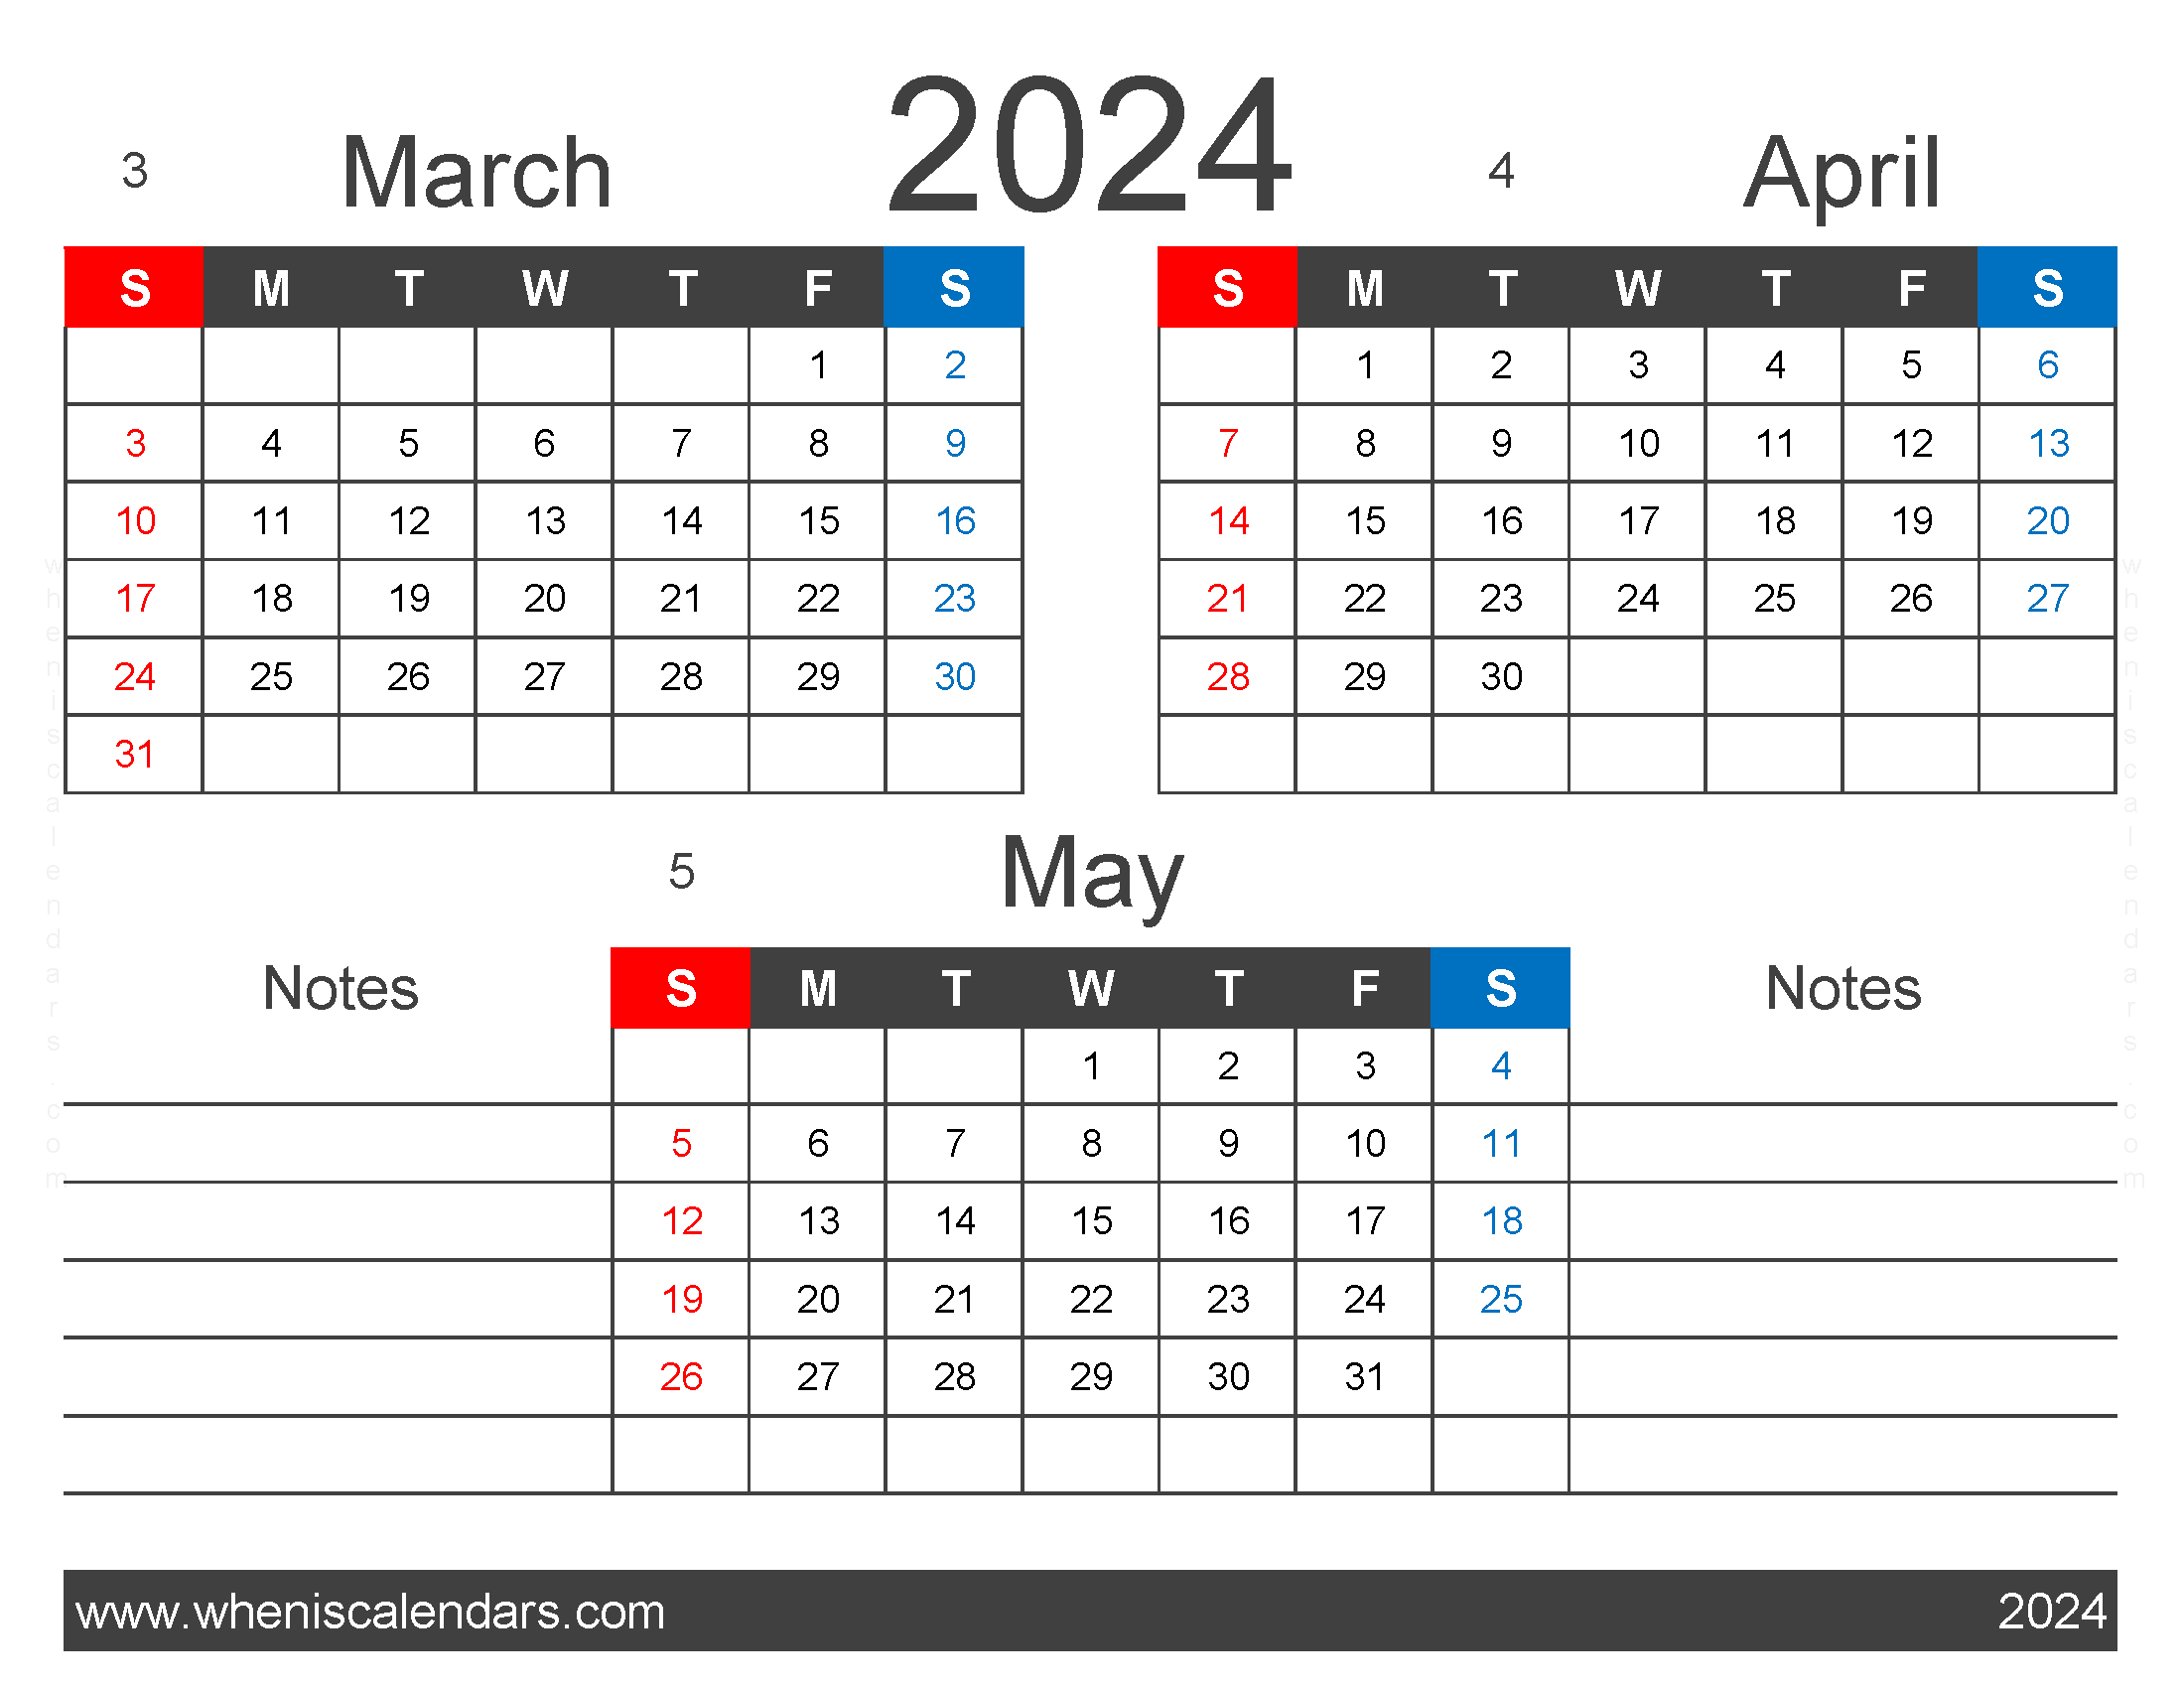 Download 3 month calendar March April May 2024 MAM421